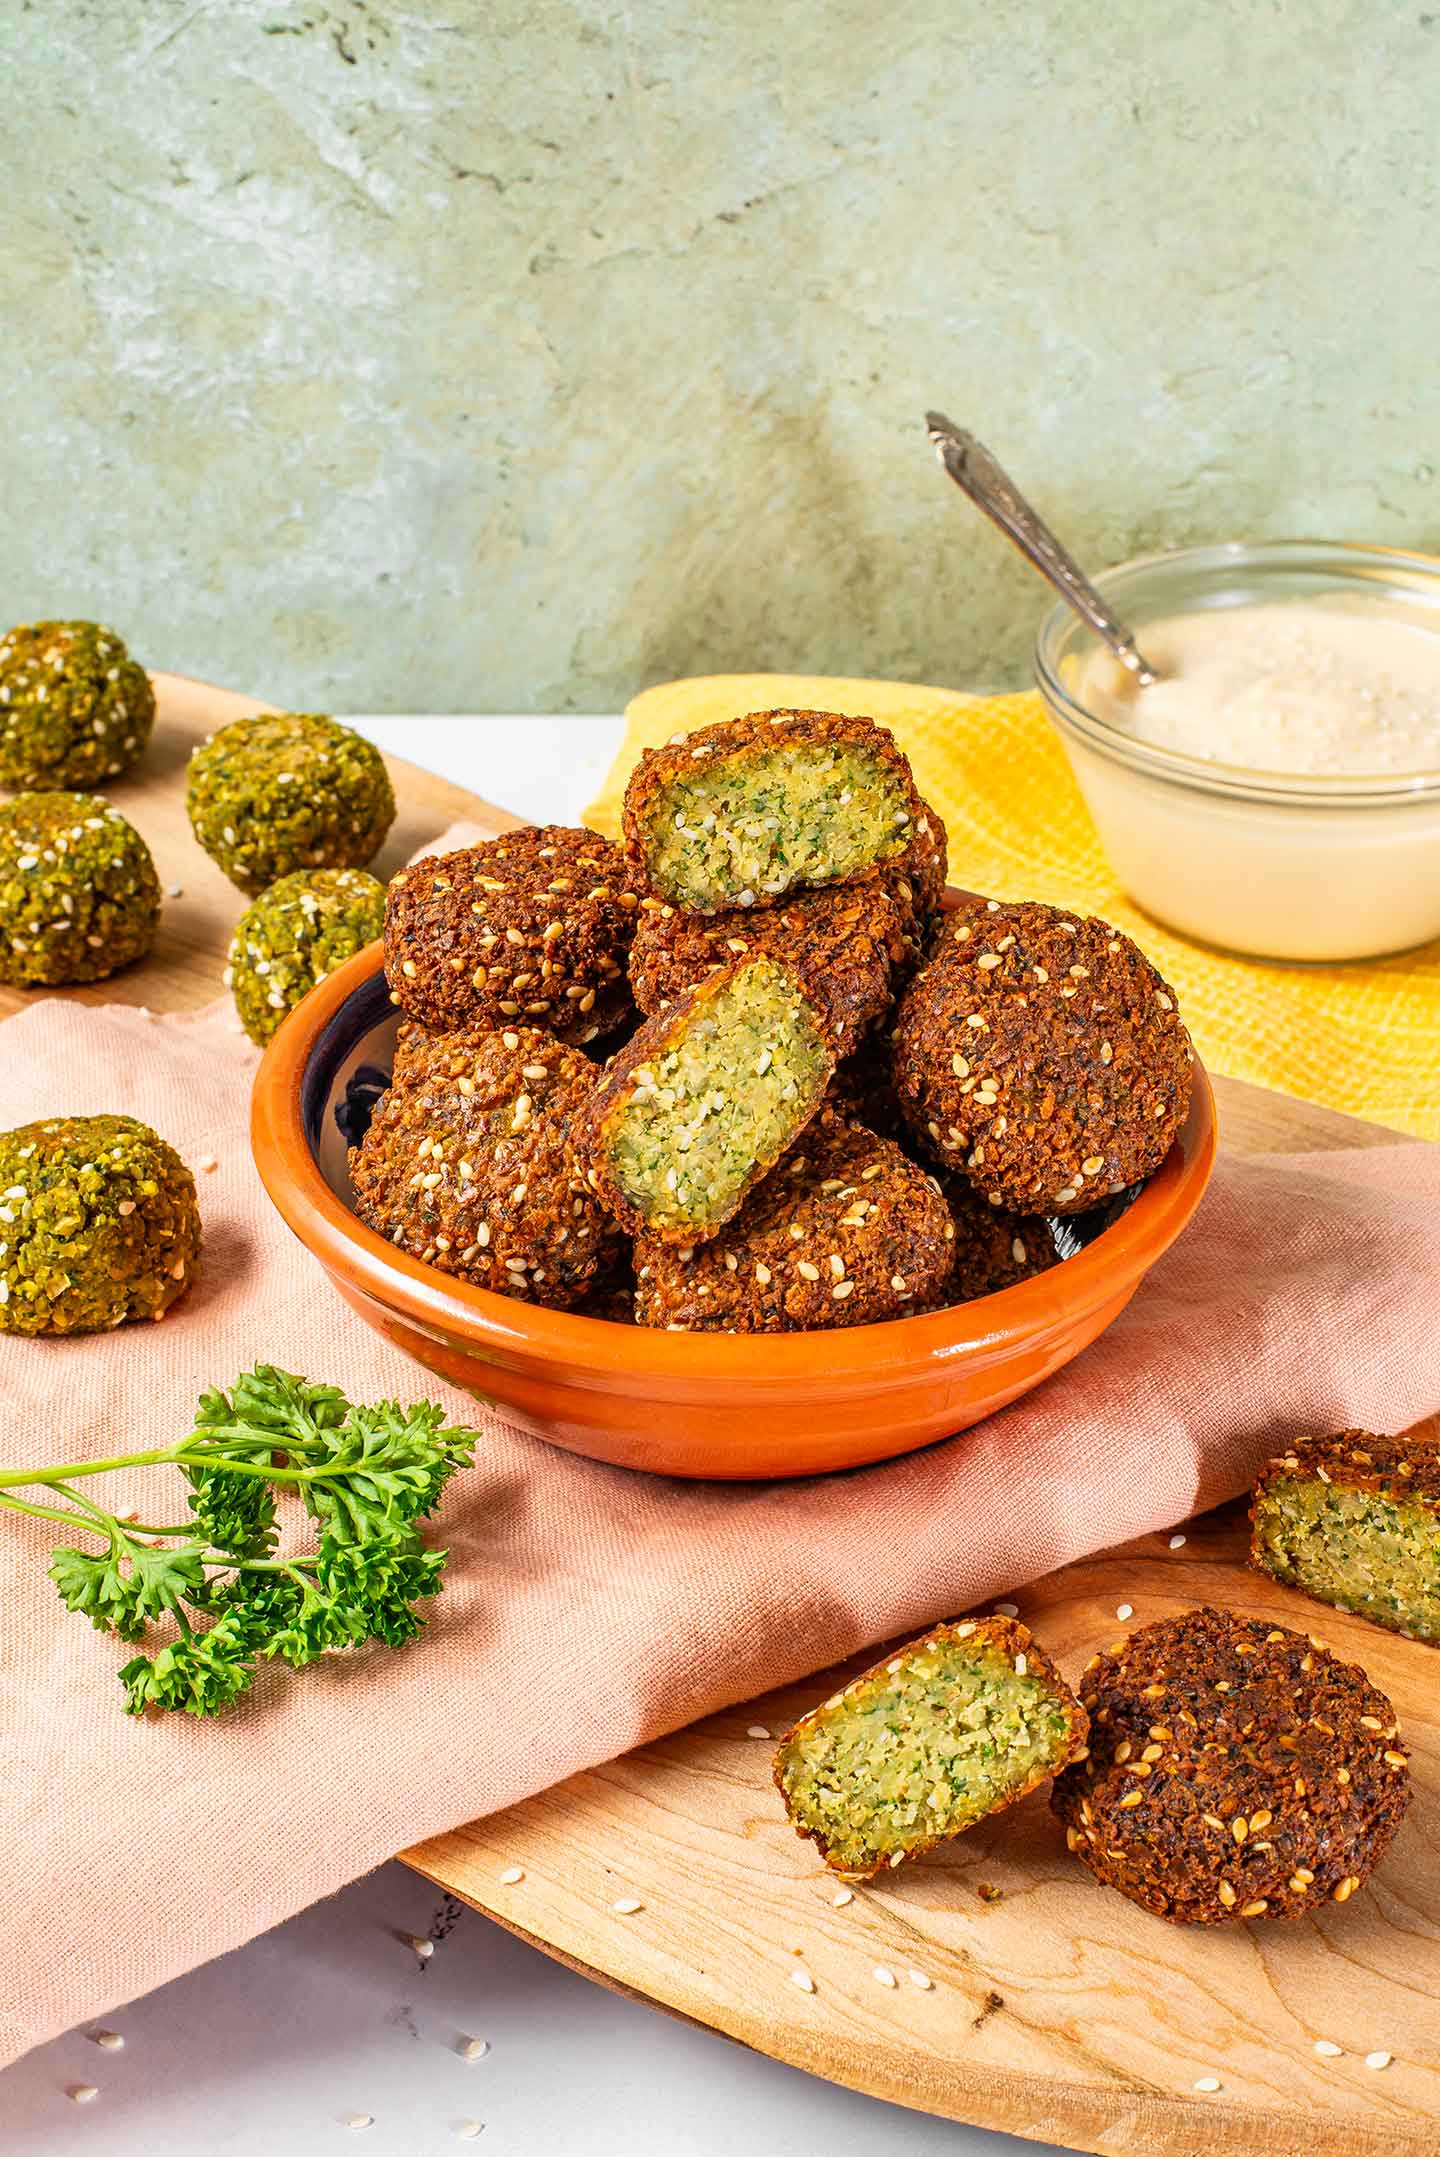 Side view of crispy falafel piled in a small dish. The outside of the falafel is dark brown from frying but the inside is green and fluffy. Some baked falafel are green on the outside an spread on a tray in the background.